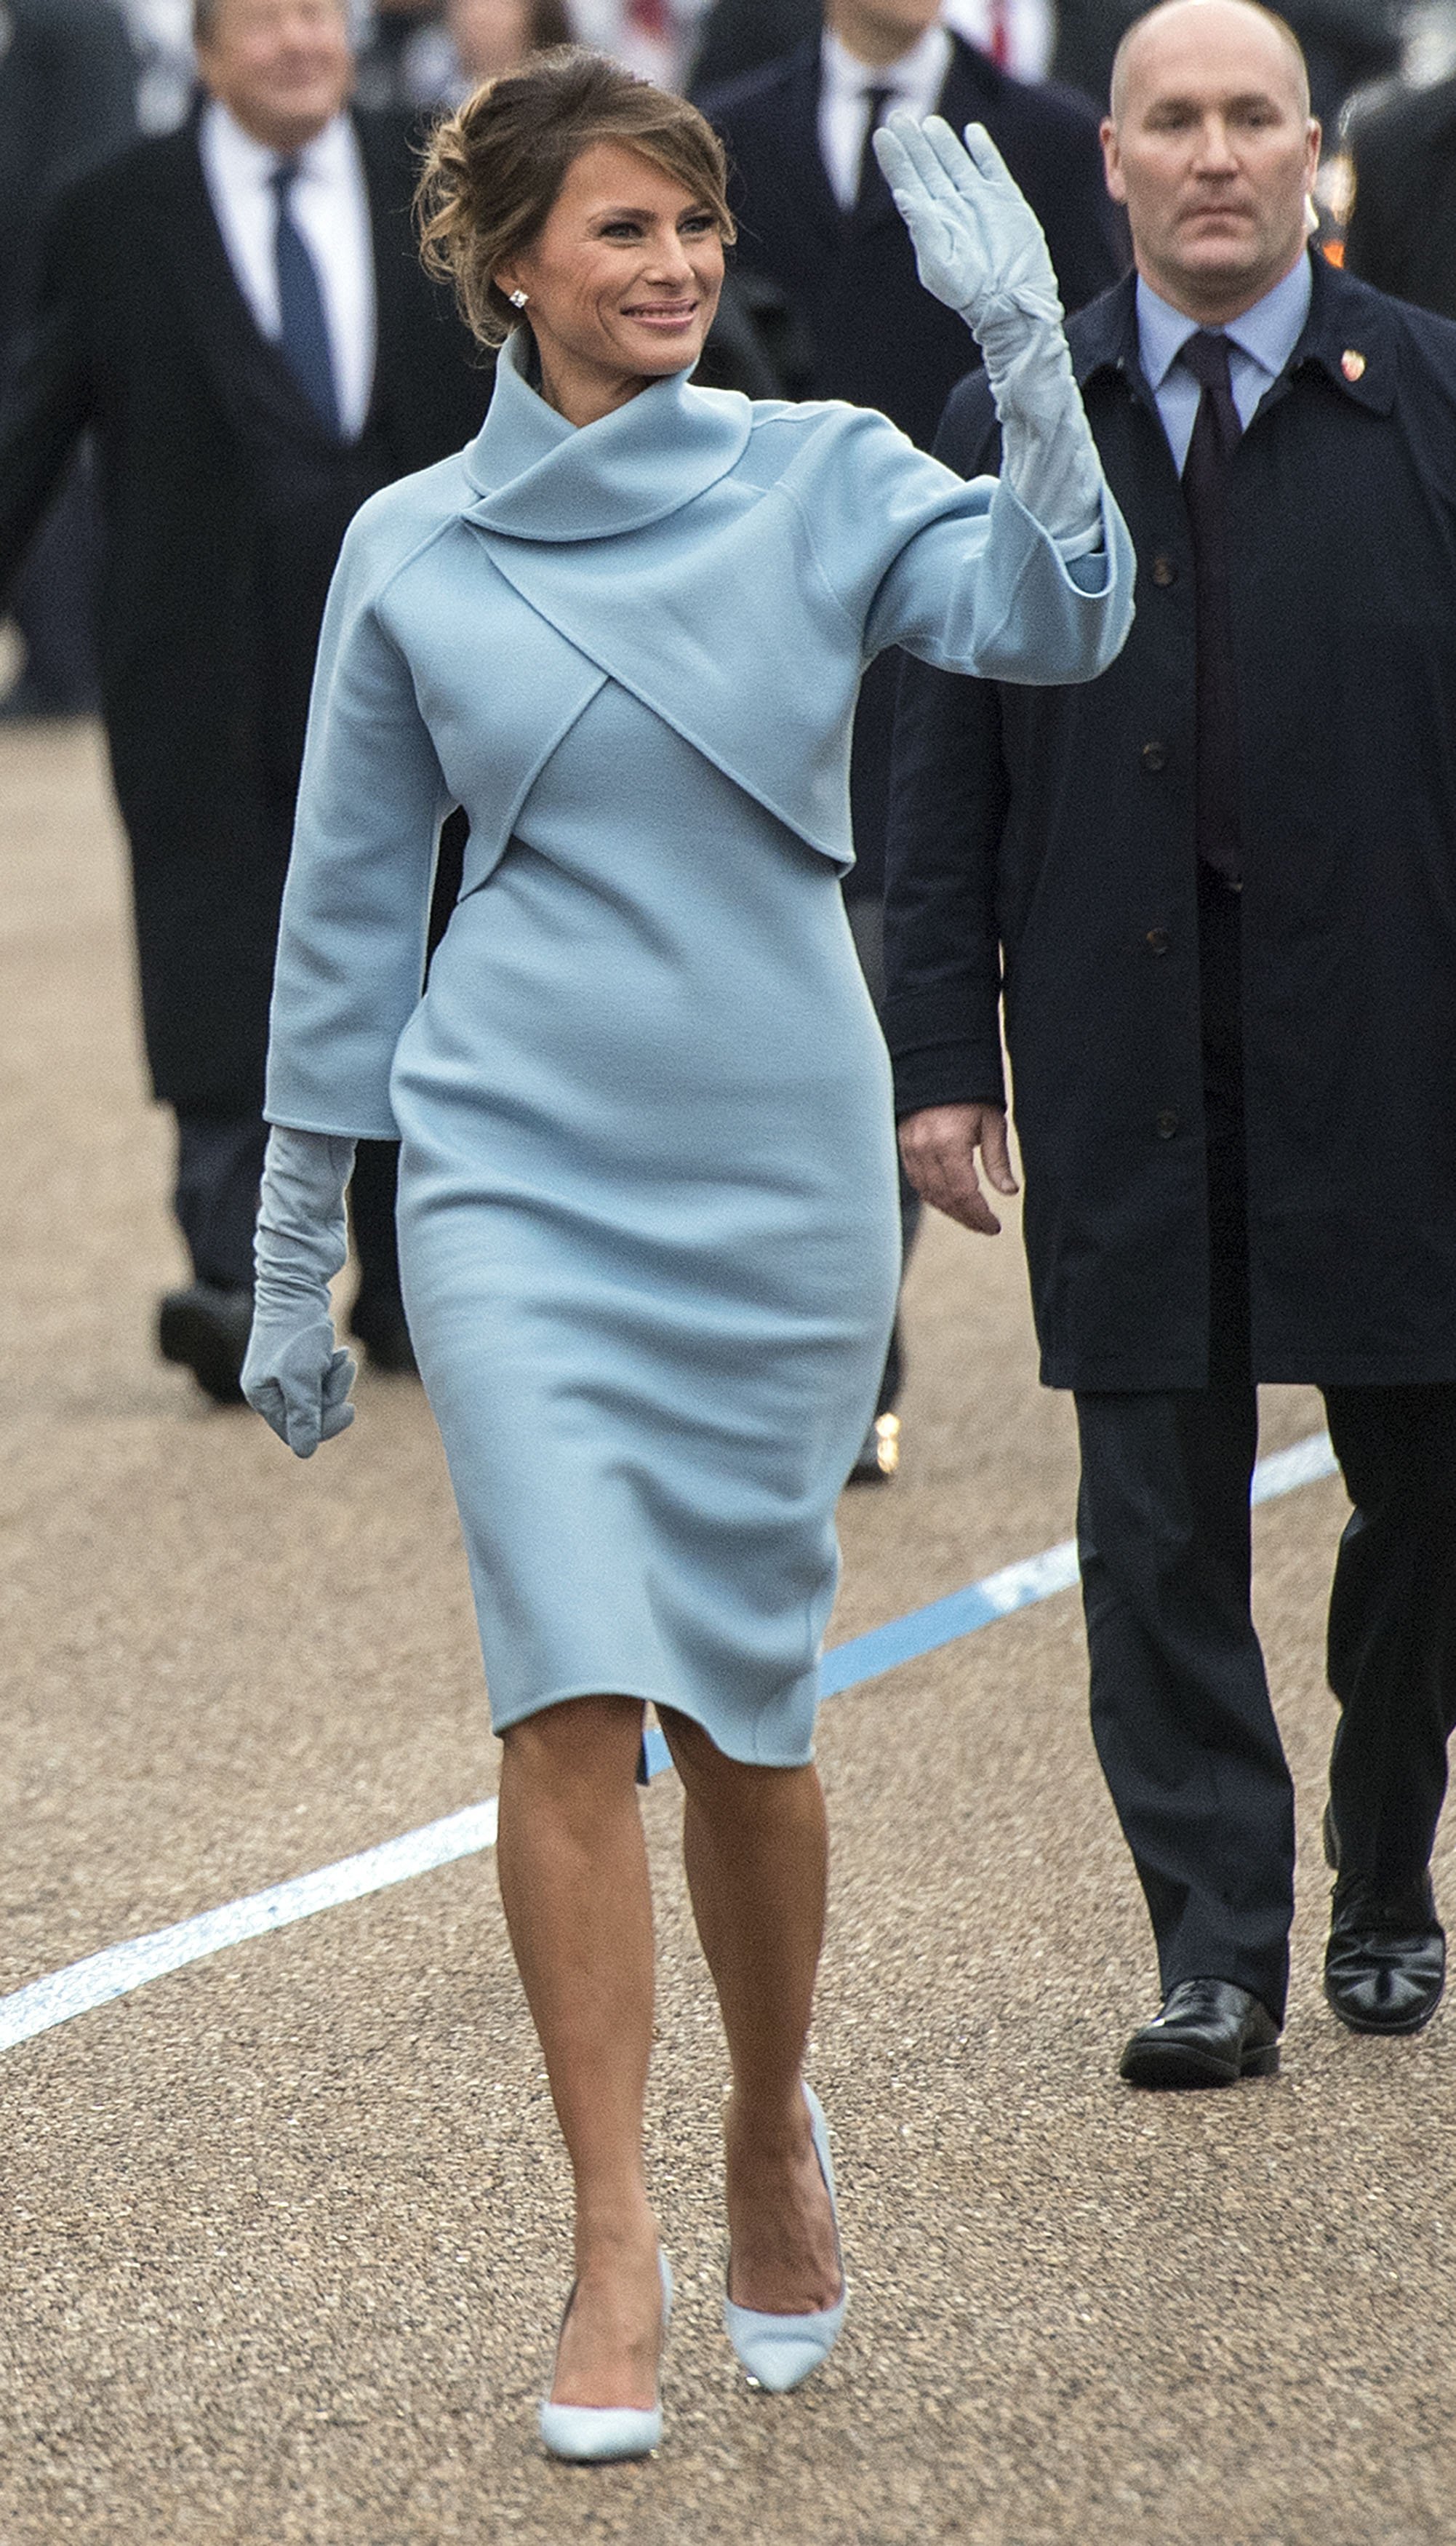  First lady Melania Trump waves to supporters in the inaugural parade on January 20, 2017 in Washington, DC | Photo: GettyImages